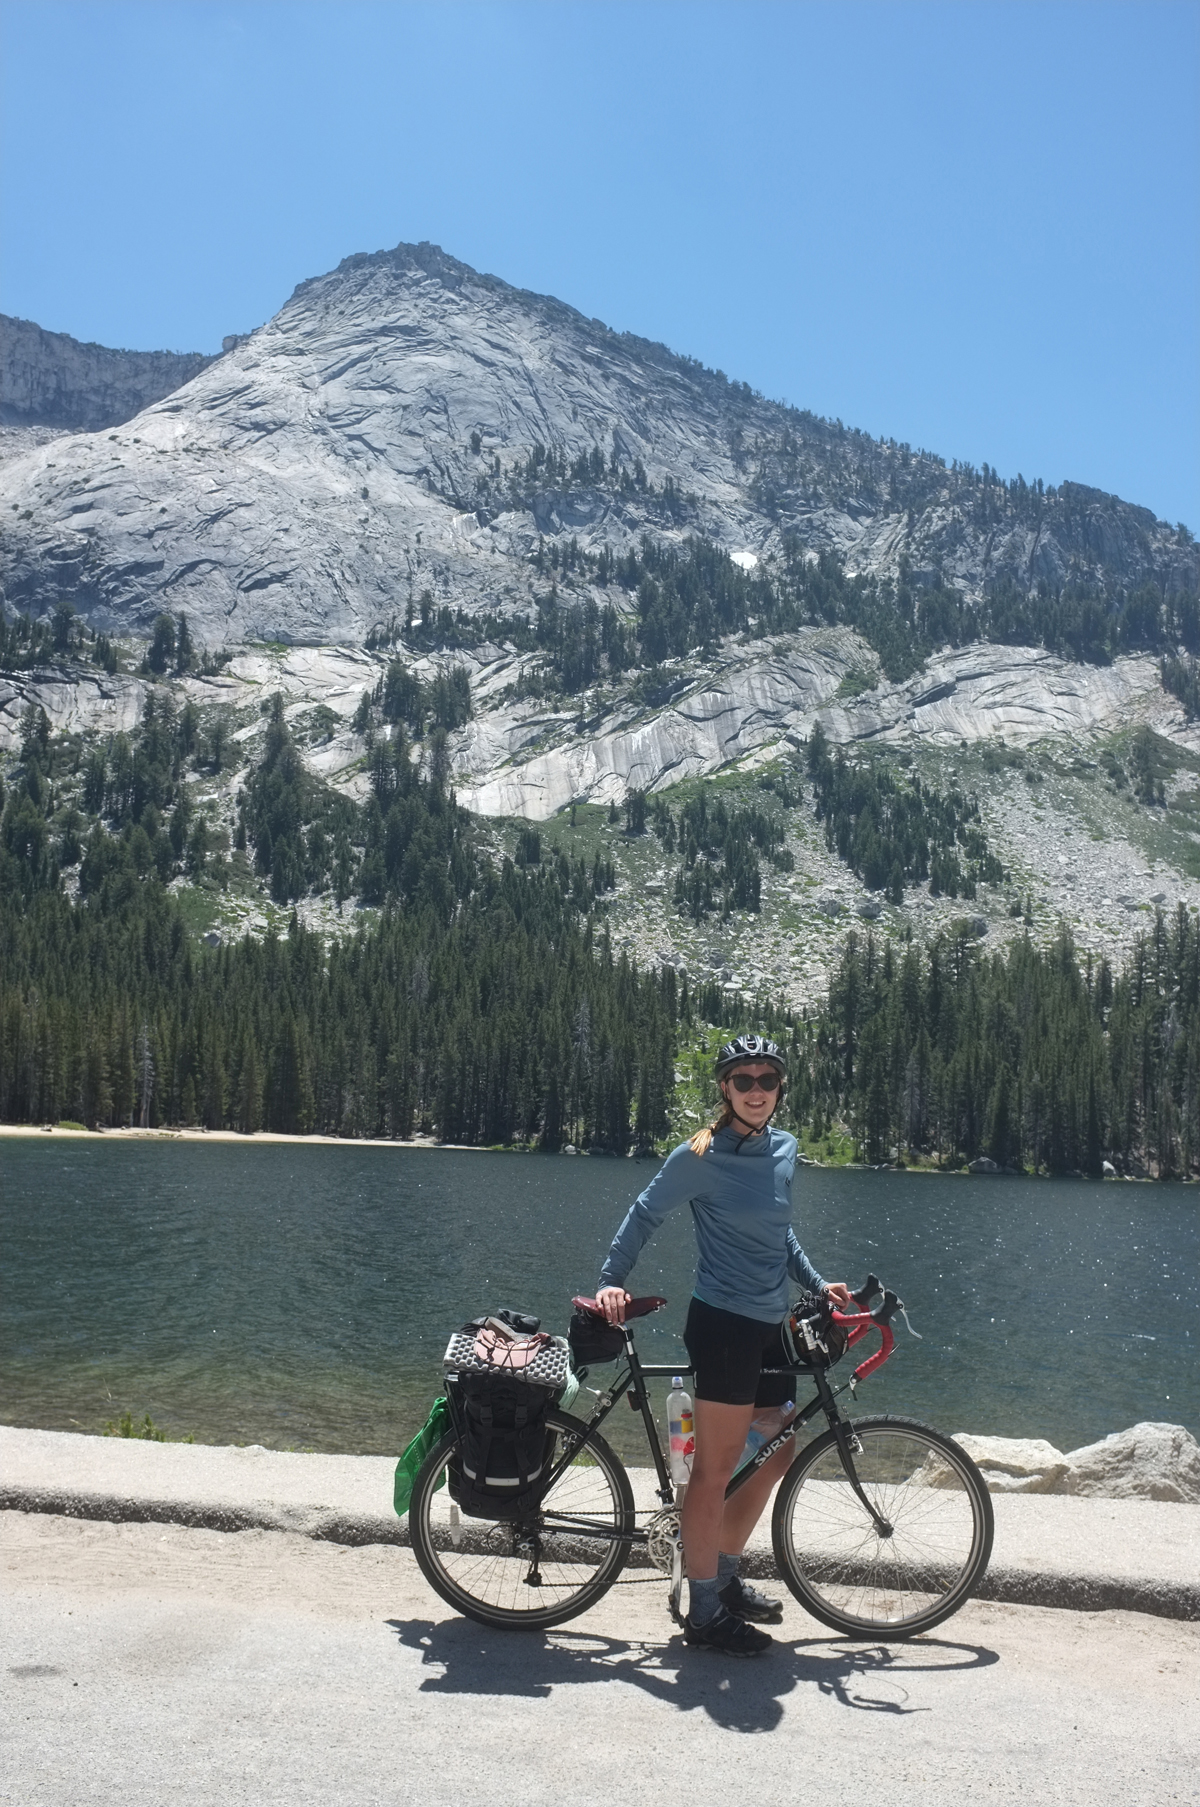 With a light pack on her final day of riding, Clara Hatcher pauses for a break next to Tenaya Lake after biking through Tuolumne Meadows. Photo by Rain Felkl